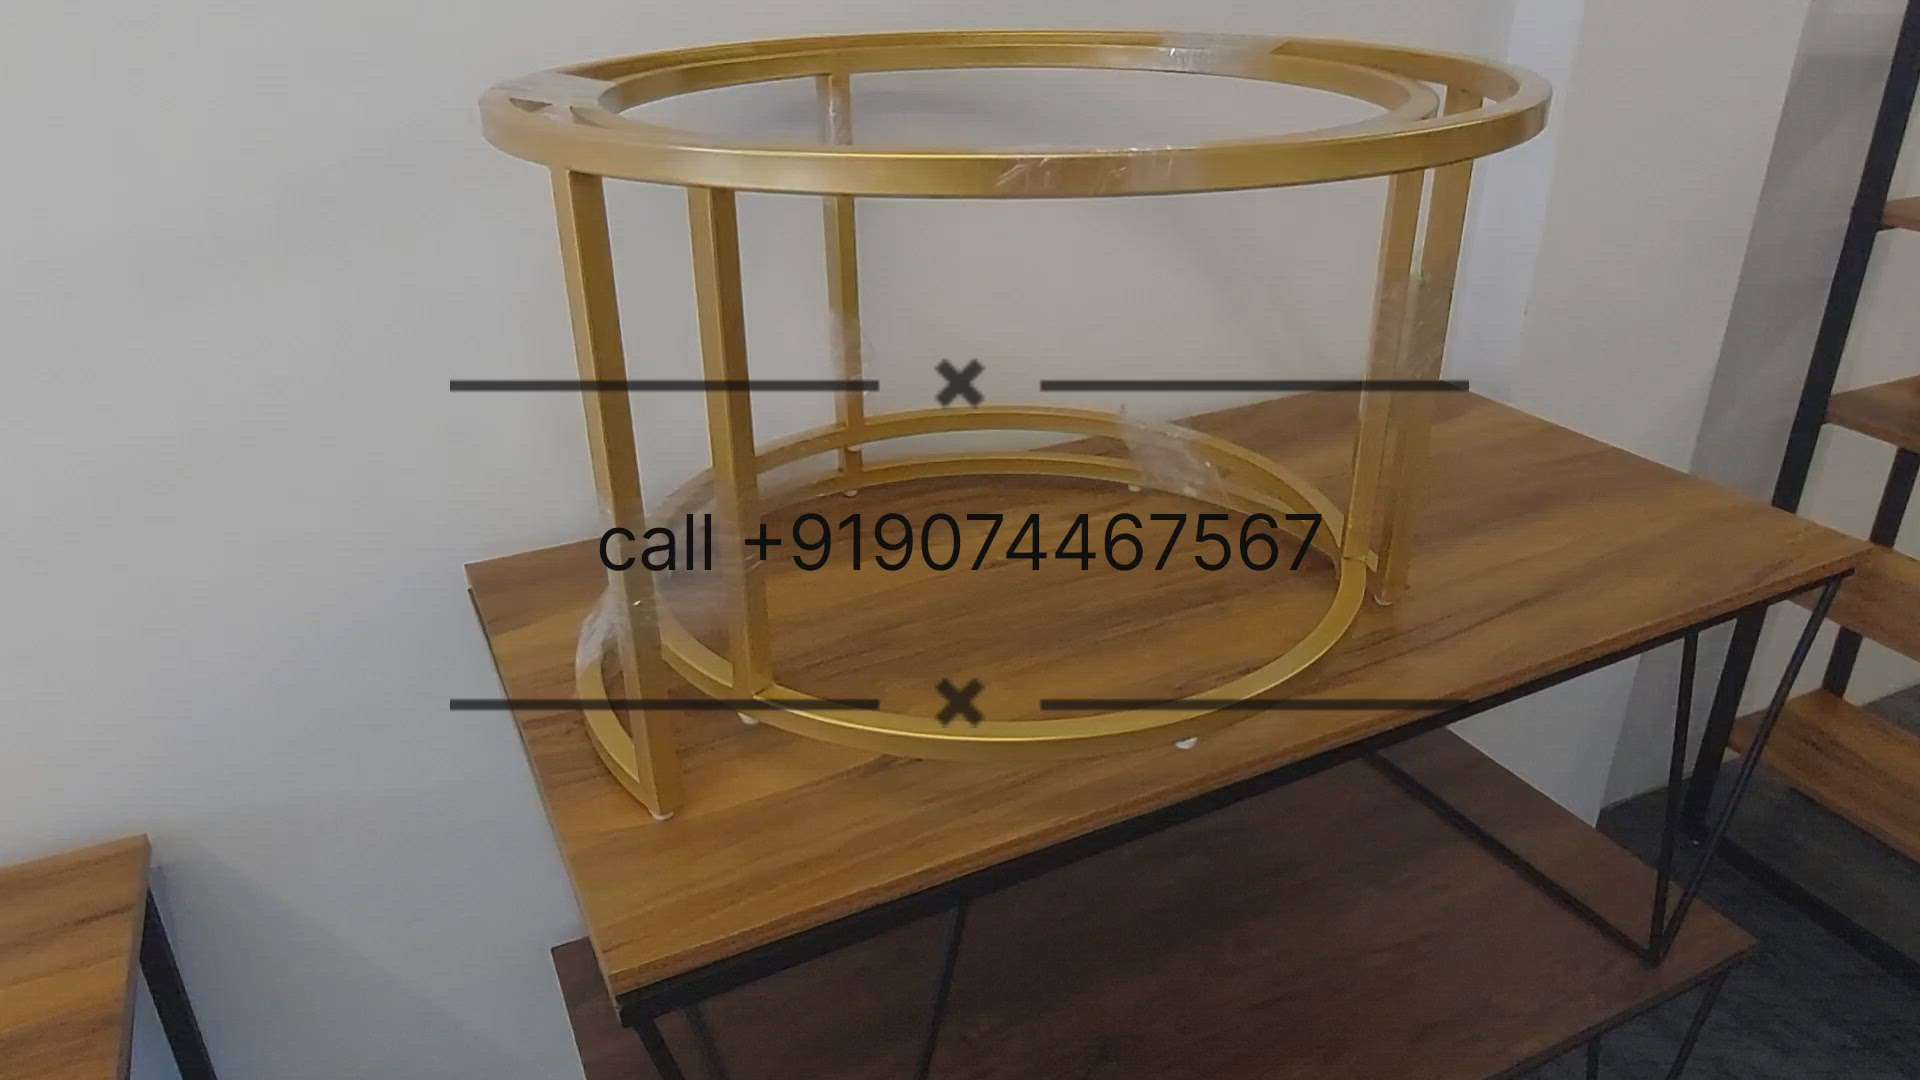 #metalfunitures  #homeinterior #HouseRenovation #furnitures #CoffeeTable 
call +919074467567
Hi , this is from metx gallery kozhikode ramanattukara.if you need any requairment of custanize metal furniture ,please contact us wholesale ande retail also available